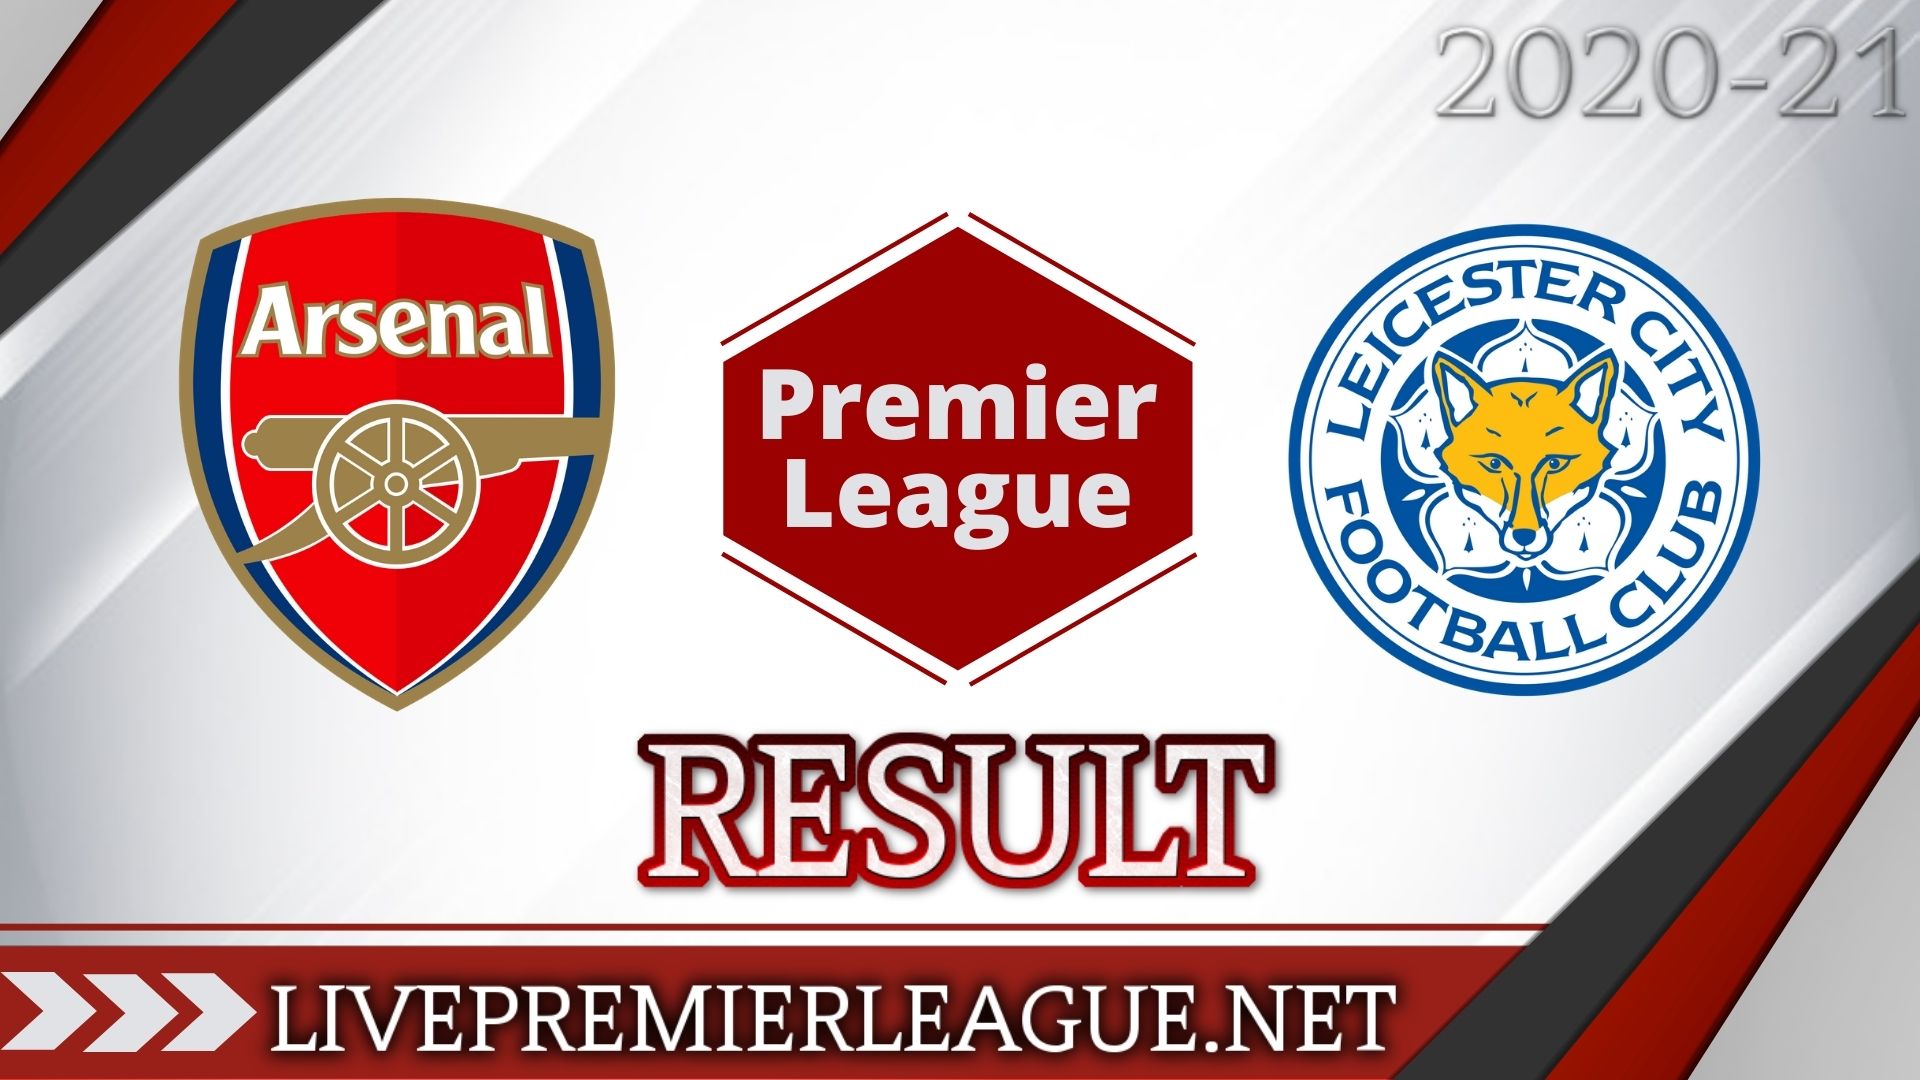 Arsenal Vs Leicester City | Week 6 Result 2020